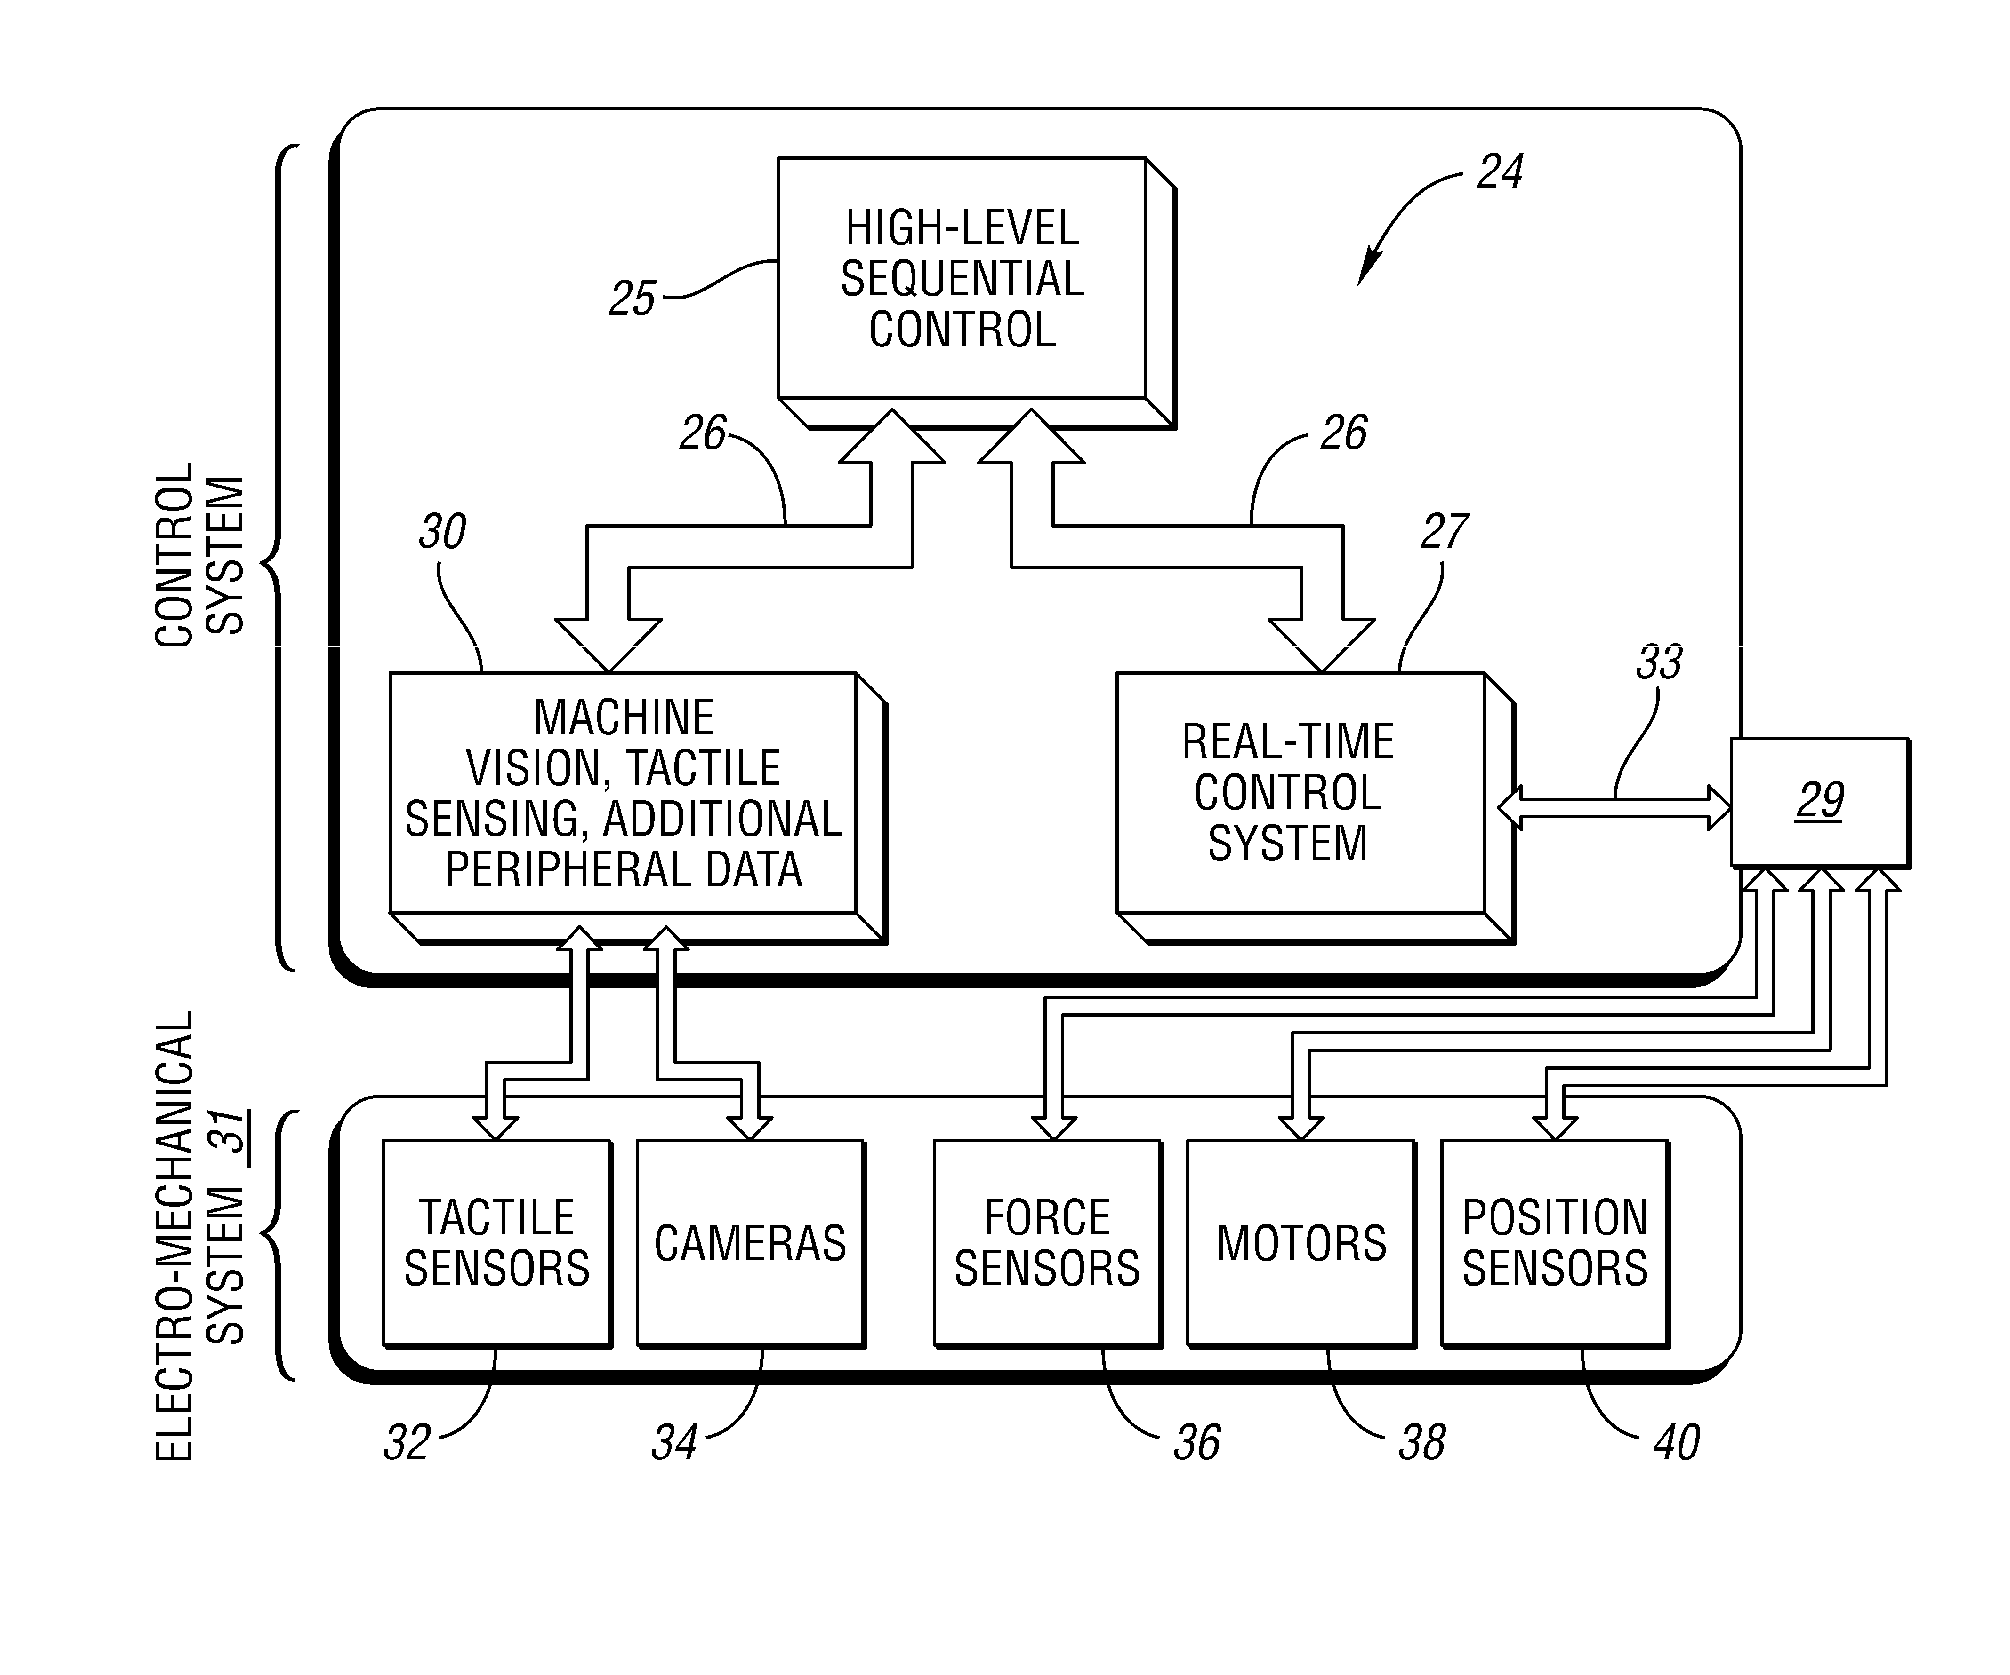 Interactive robot control system and method of use